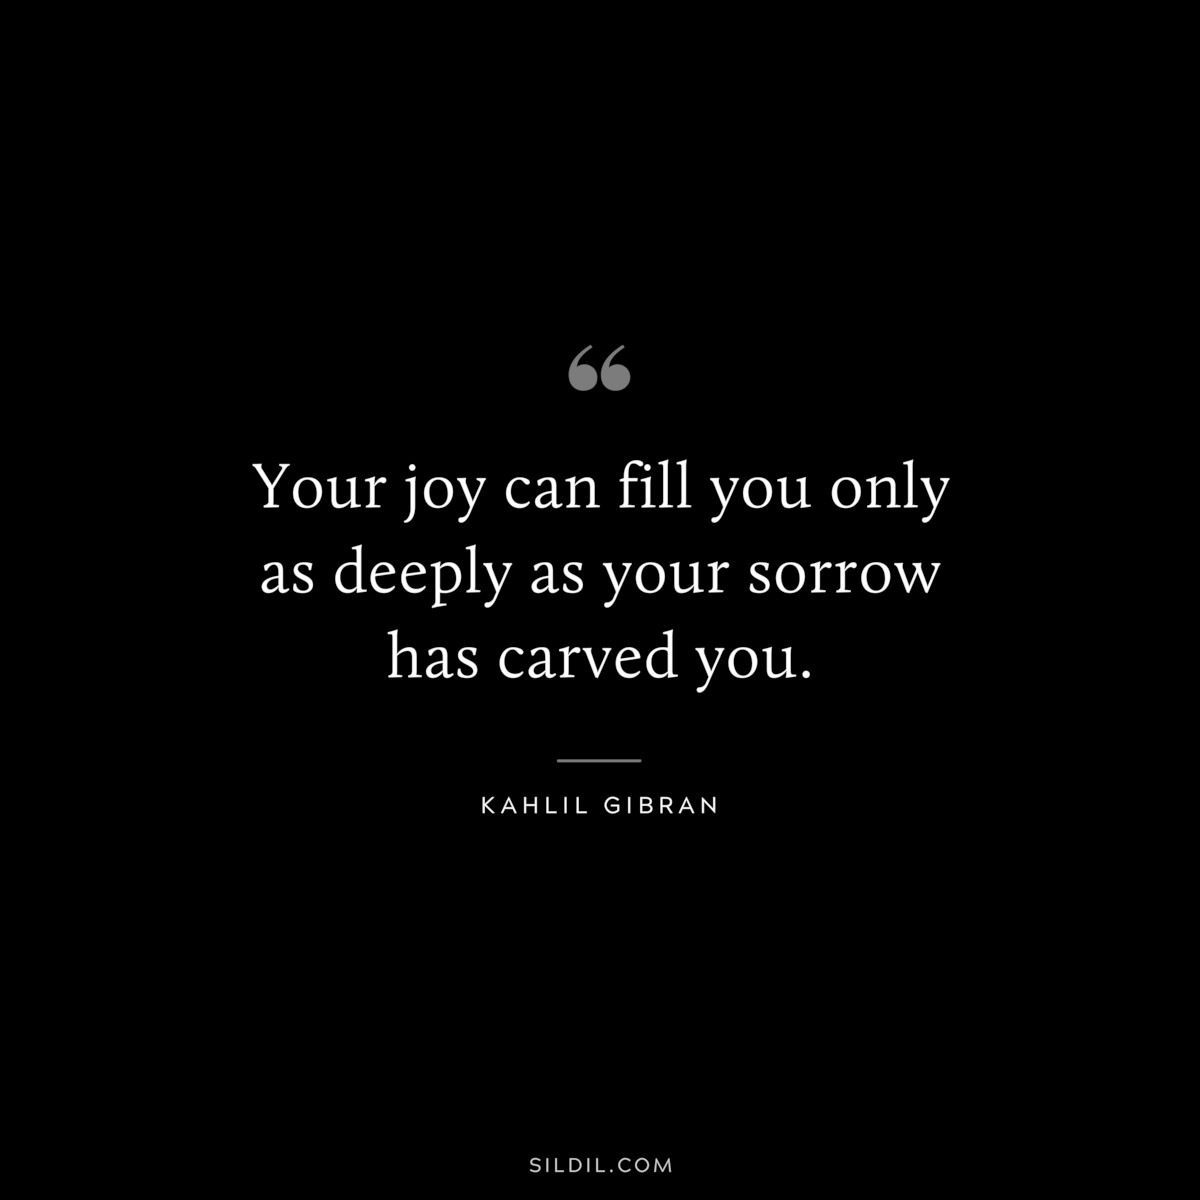 Your joy can fill you only as deeply as your sorrow has carved you. ― Kahlil Gibran